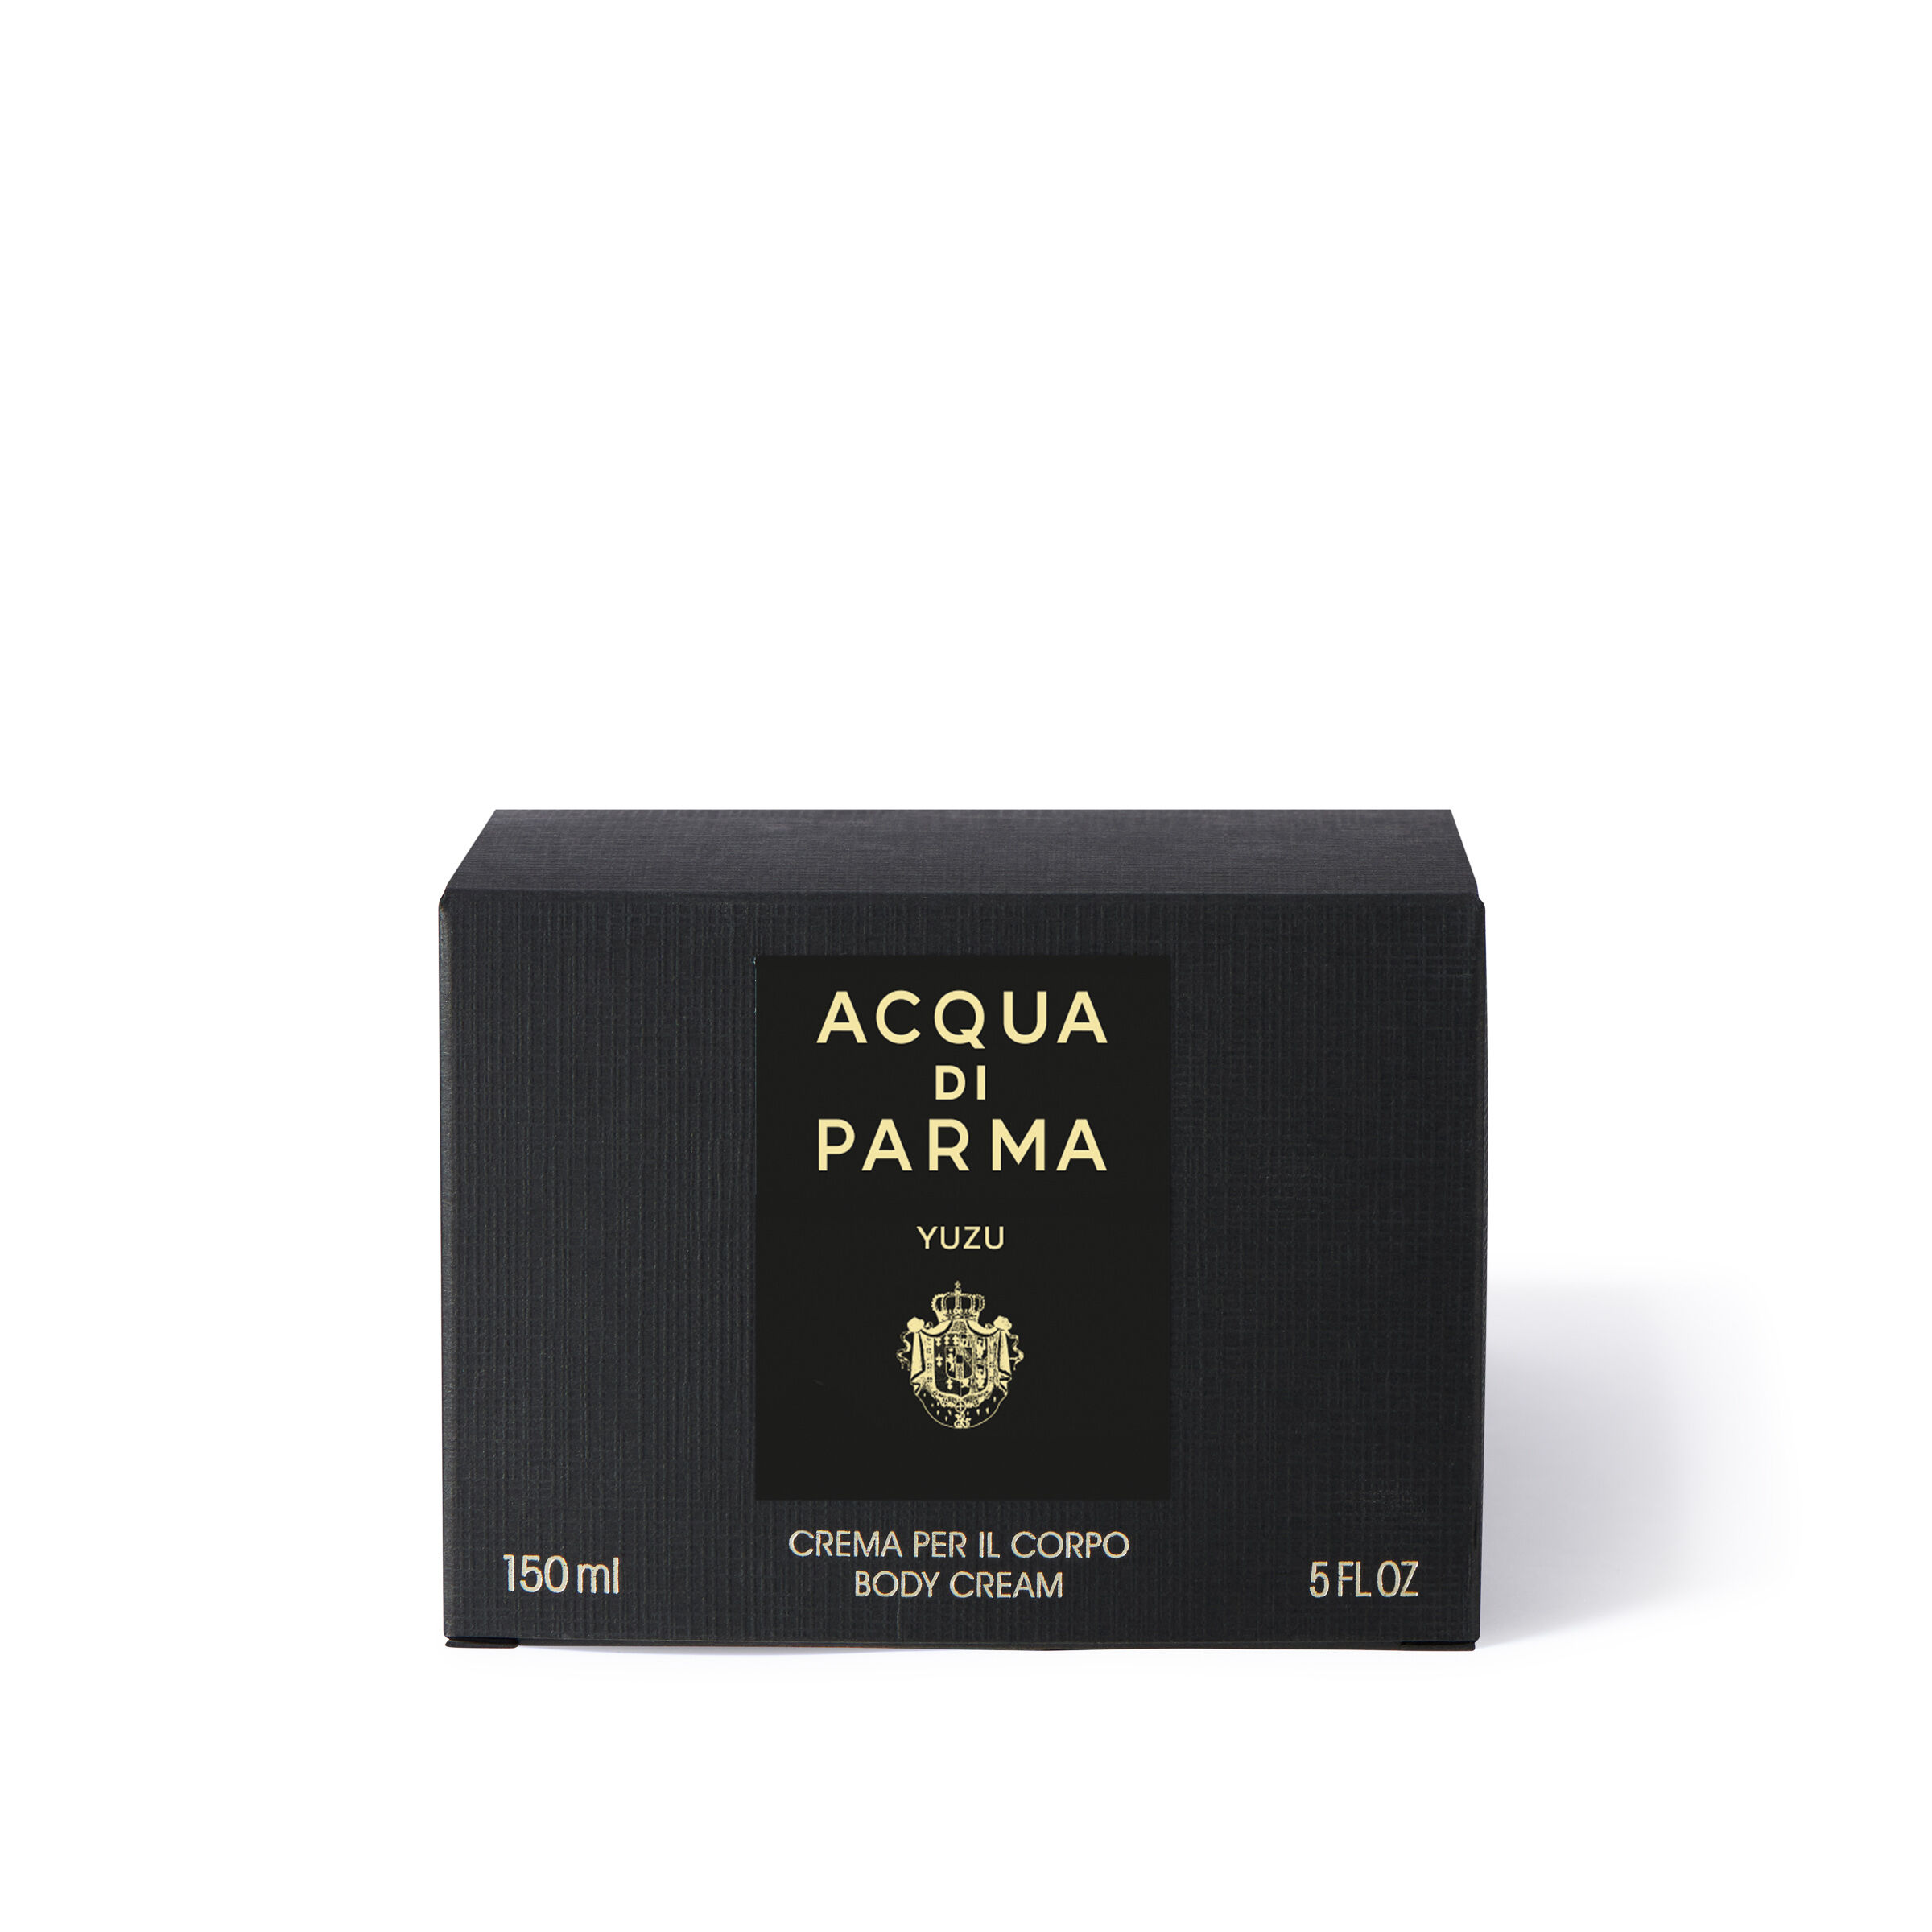 Shop Yuzu Cream by Acqua di Parma. Discover the Yuzu body lotion, a  moisturizing cream that leaves your skin hydrated and perfumed thanks to  the 